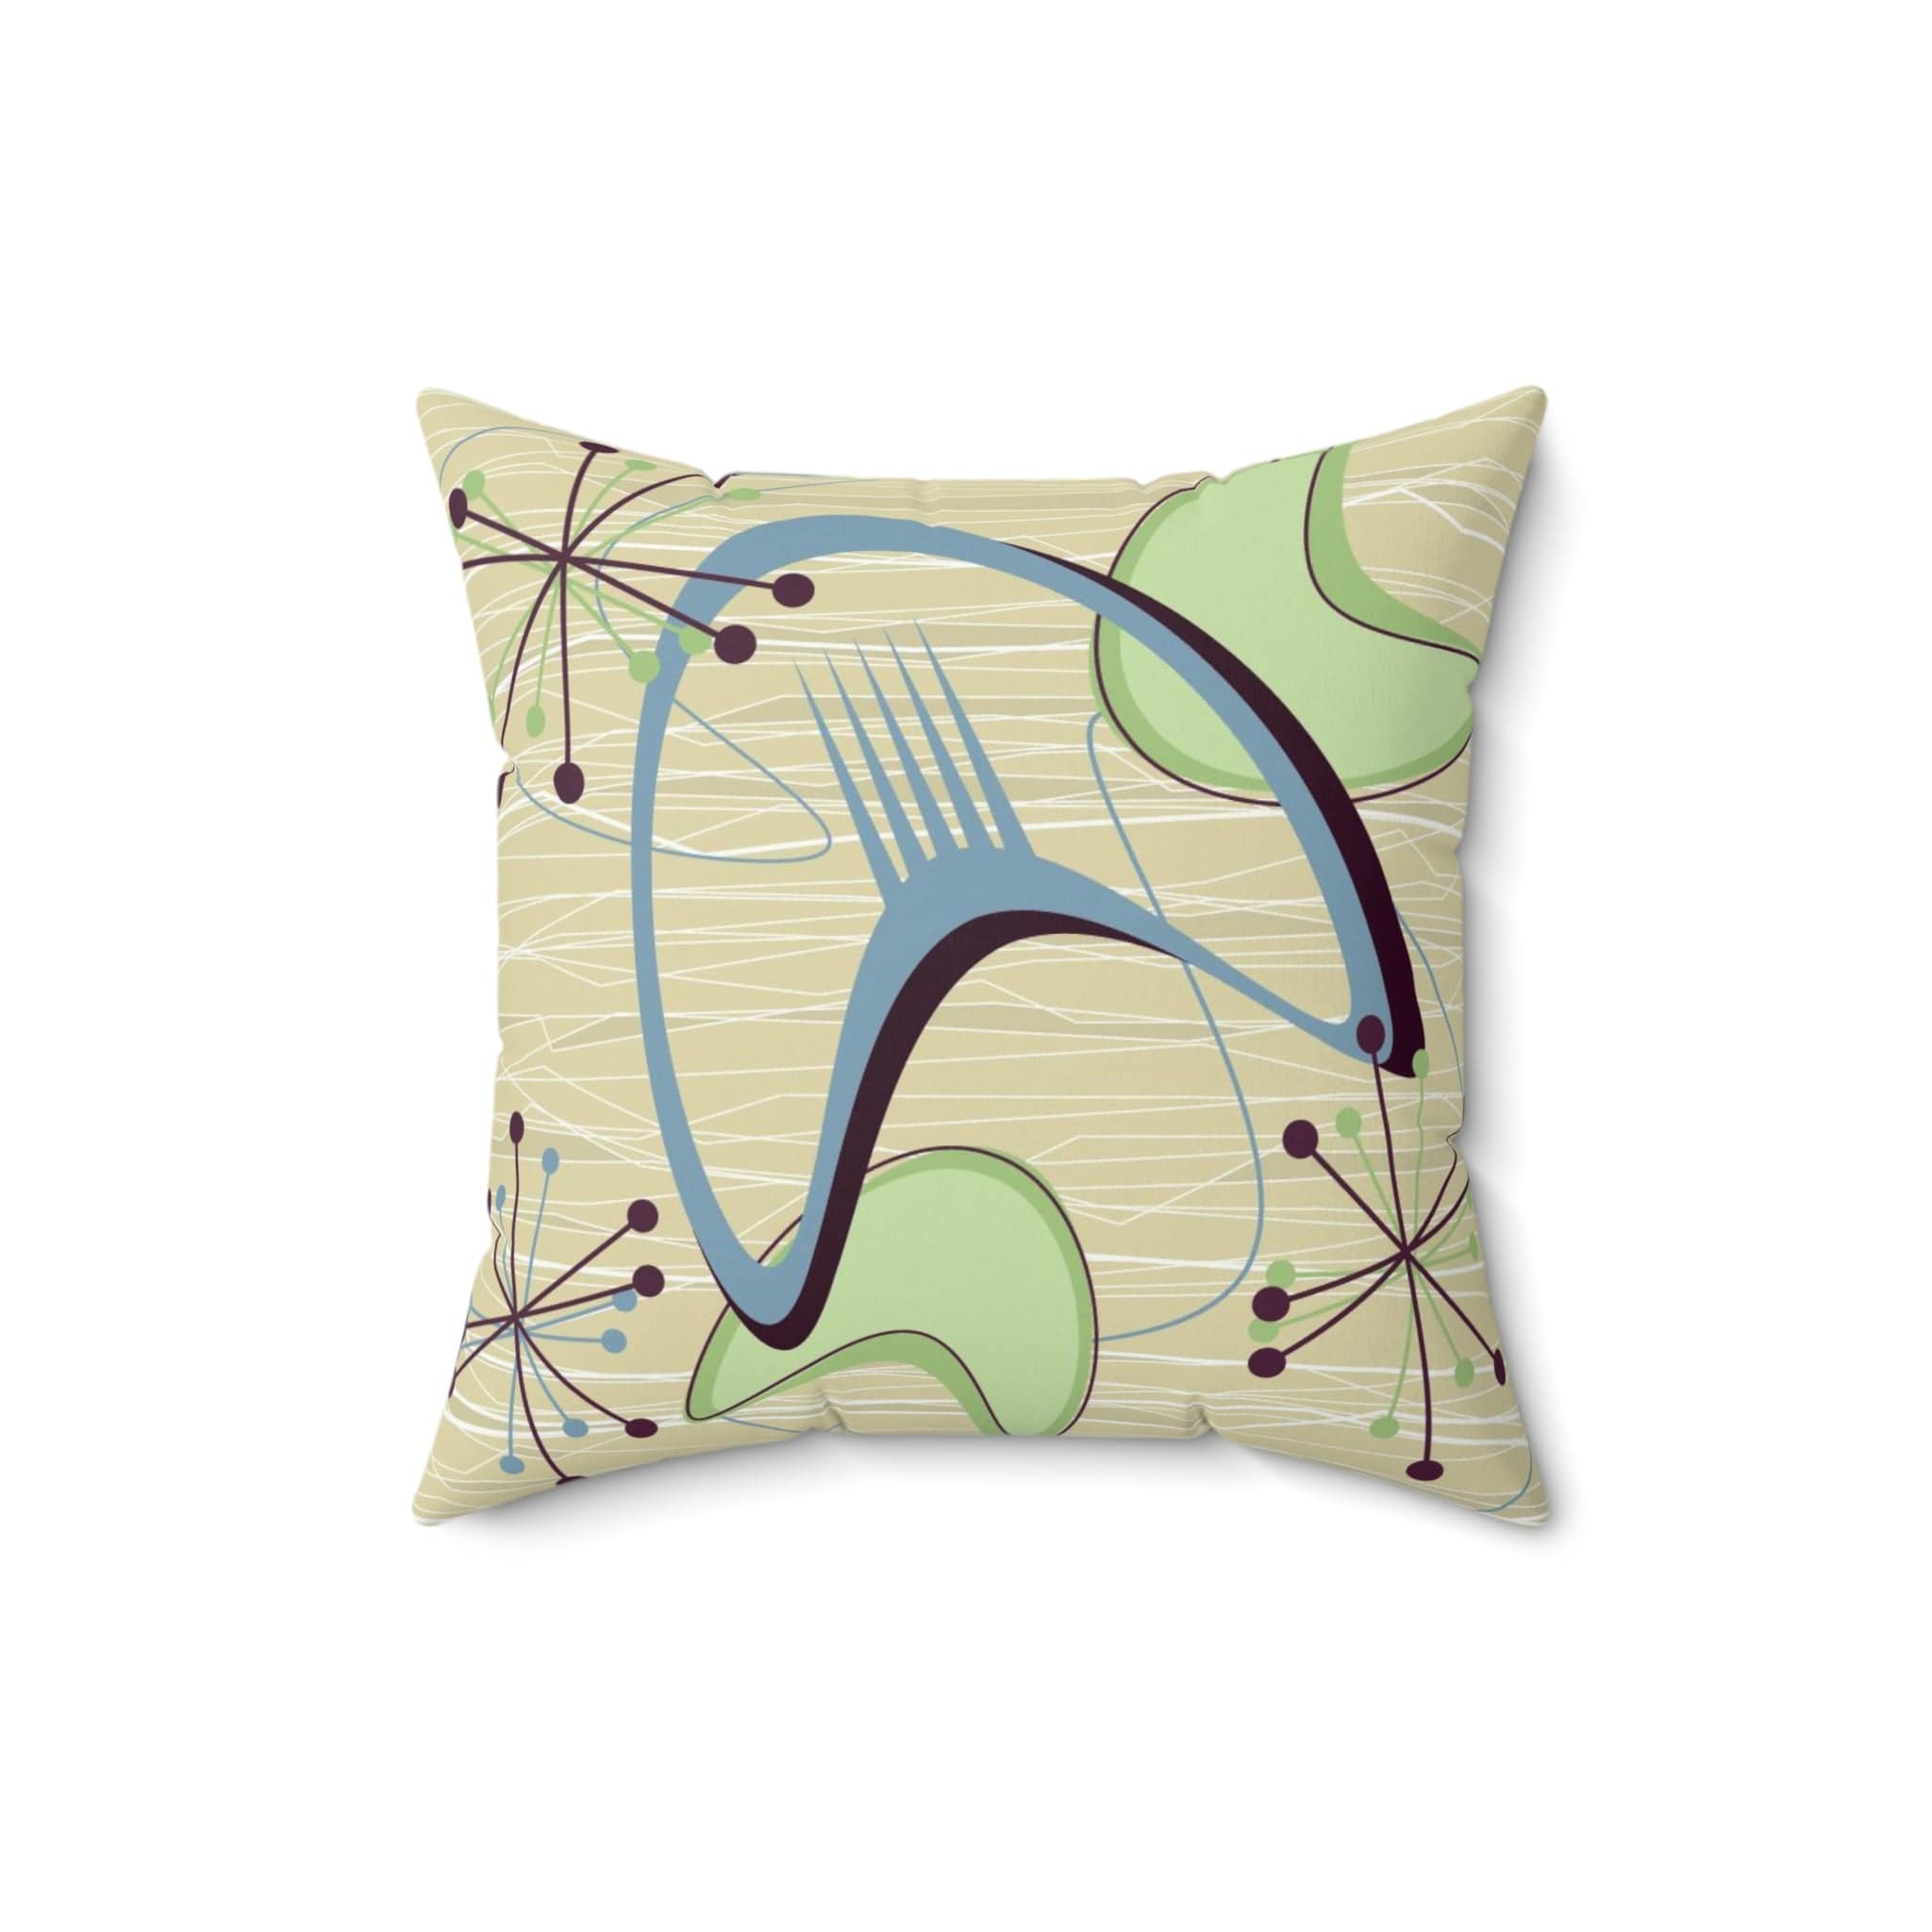 Printify 1950s Atomic Boomerang Mid Century Modern Throw Pillow in Retro Vintage Beige, Blue, Green Geometric Starbursts, MCM Abstract Accent Pillow Home Decor 16&quot; × 16&quot; 15003298257363880645